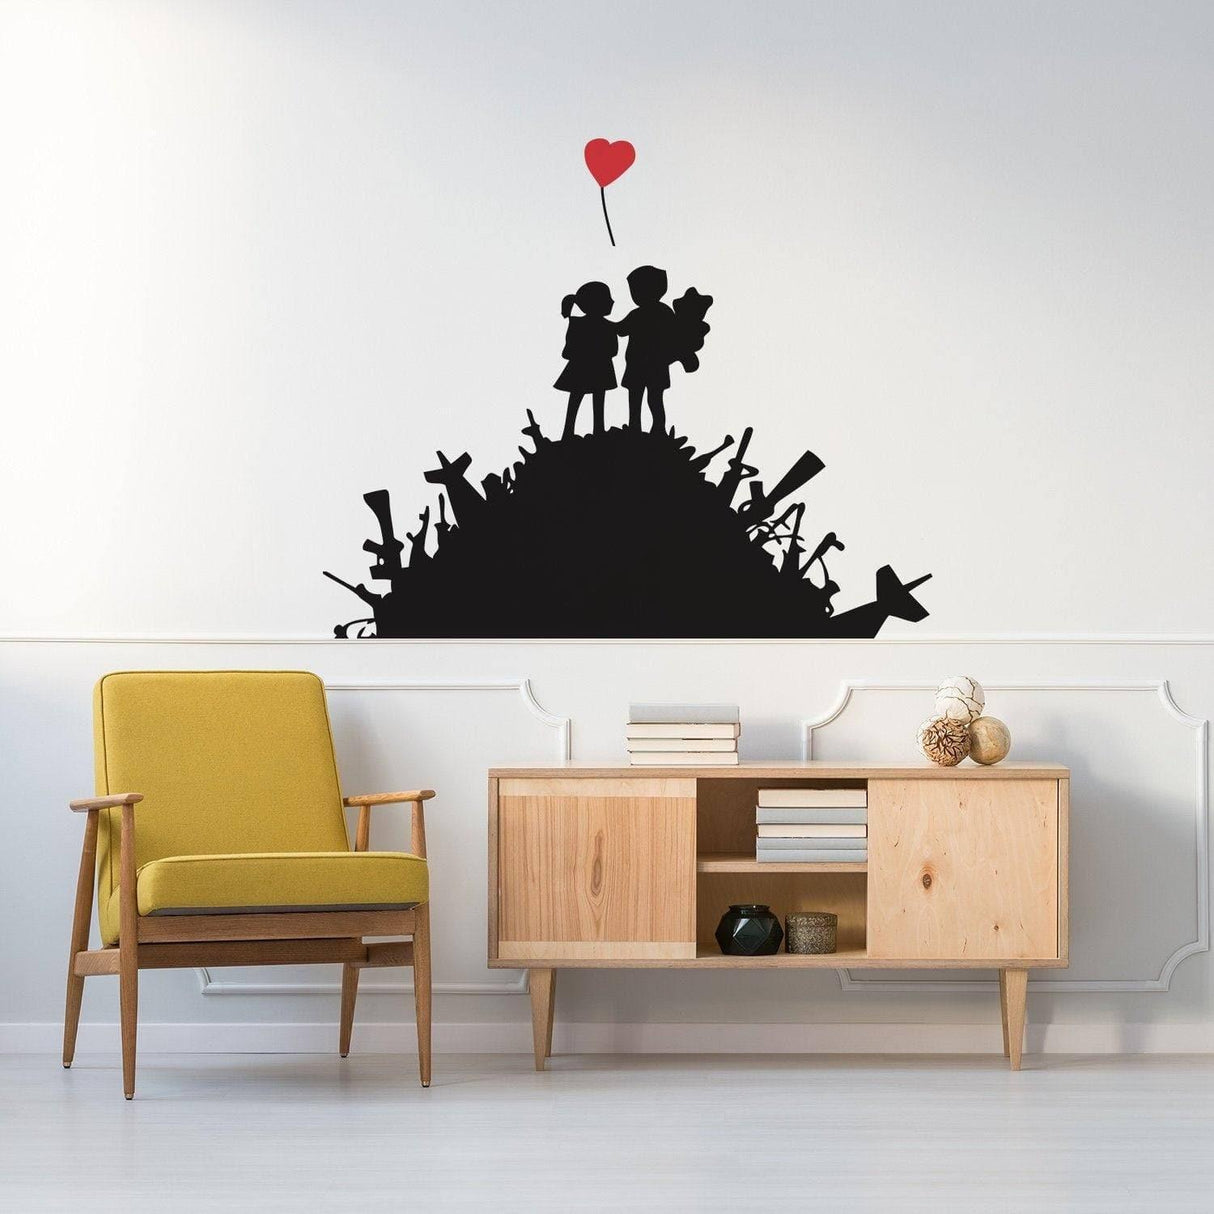 Banksy Boy And Girl Friend Wall Sticker - Kid With A Child Art Balloon Decor Room Street Graffiti Decal - Bank Ash Home Room Mural - Decords